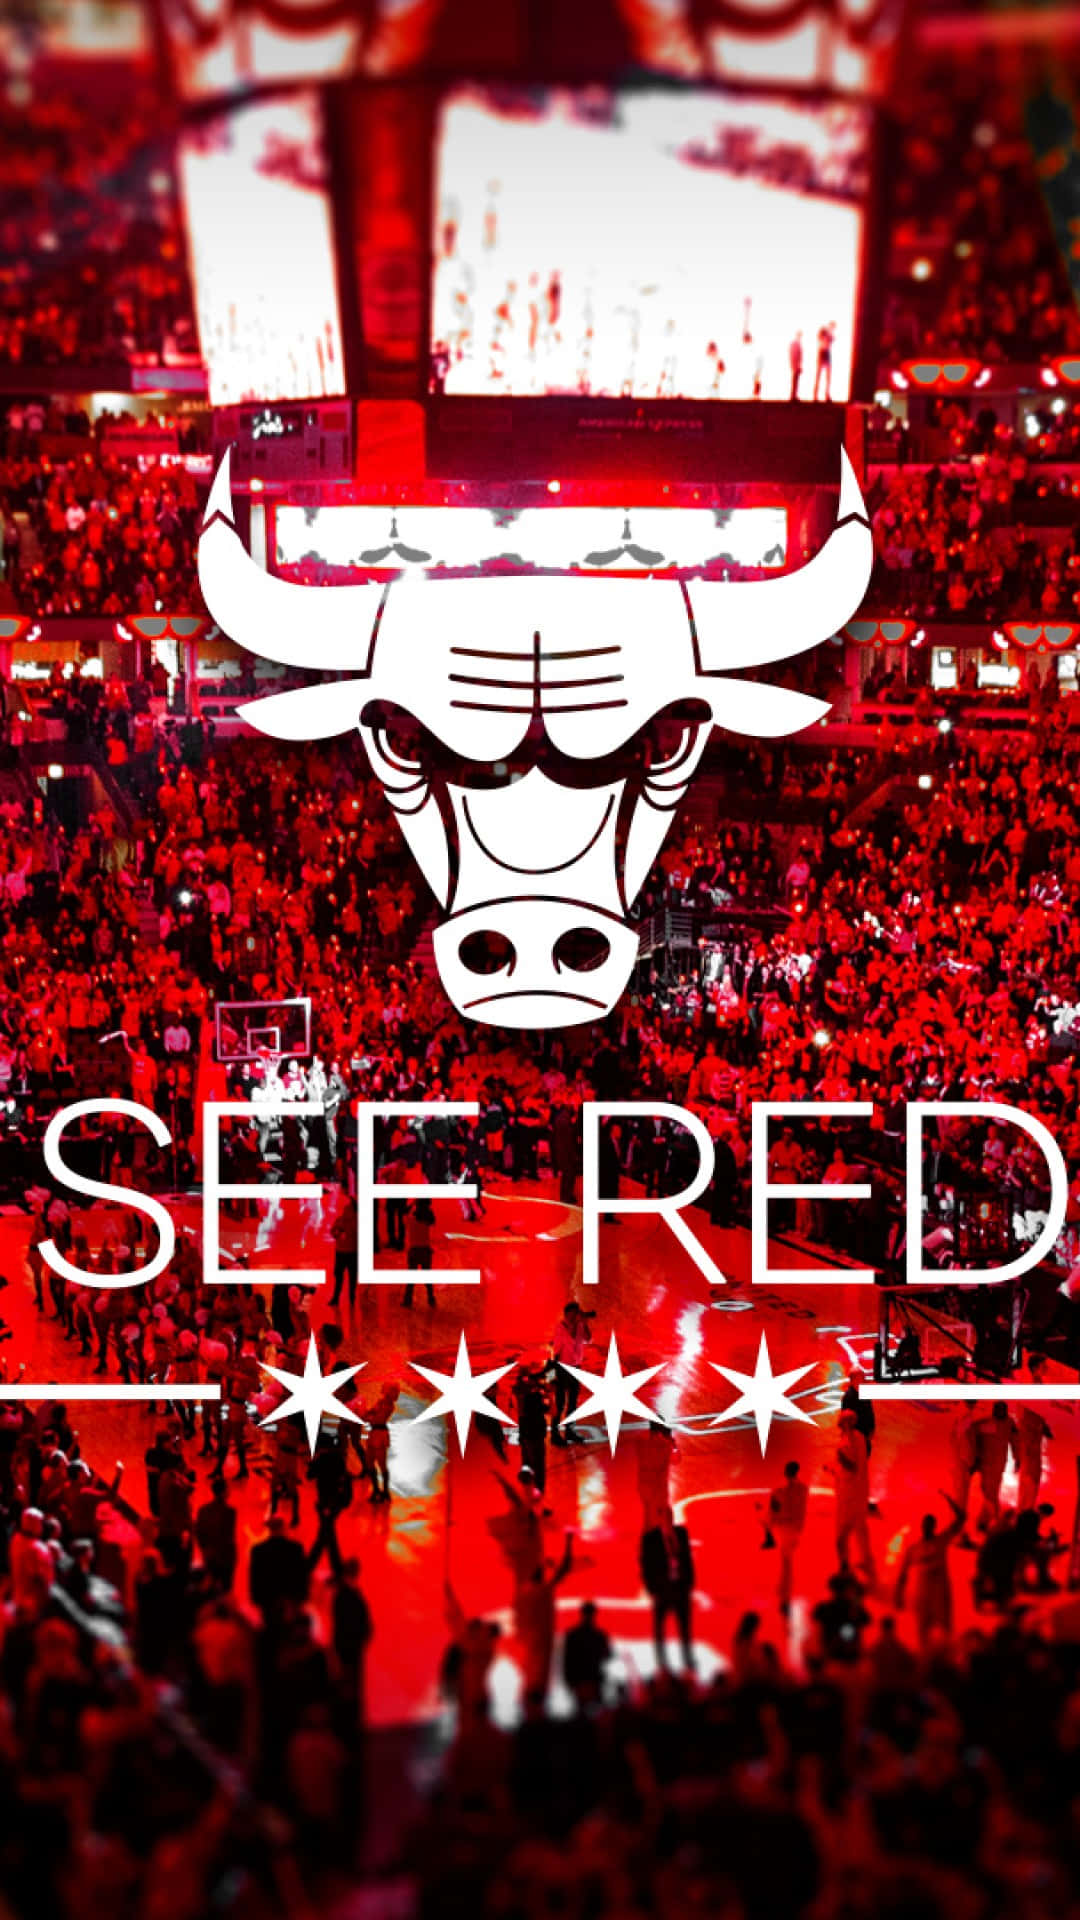 The Chicago Bulls Logo With The Words See Red Wallpaper